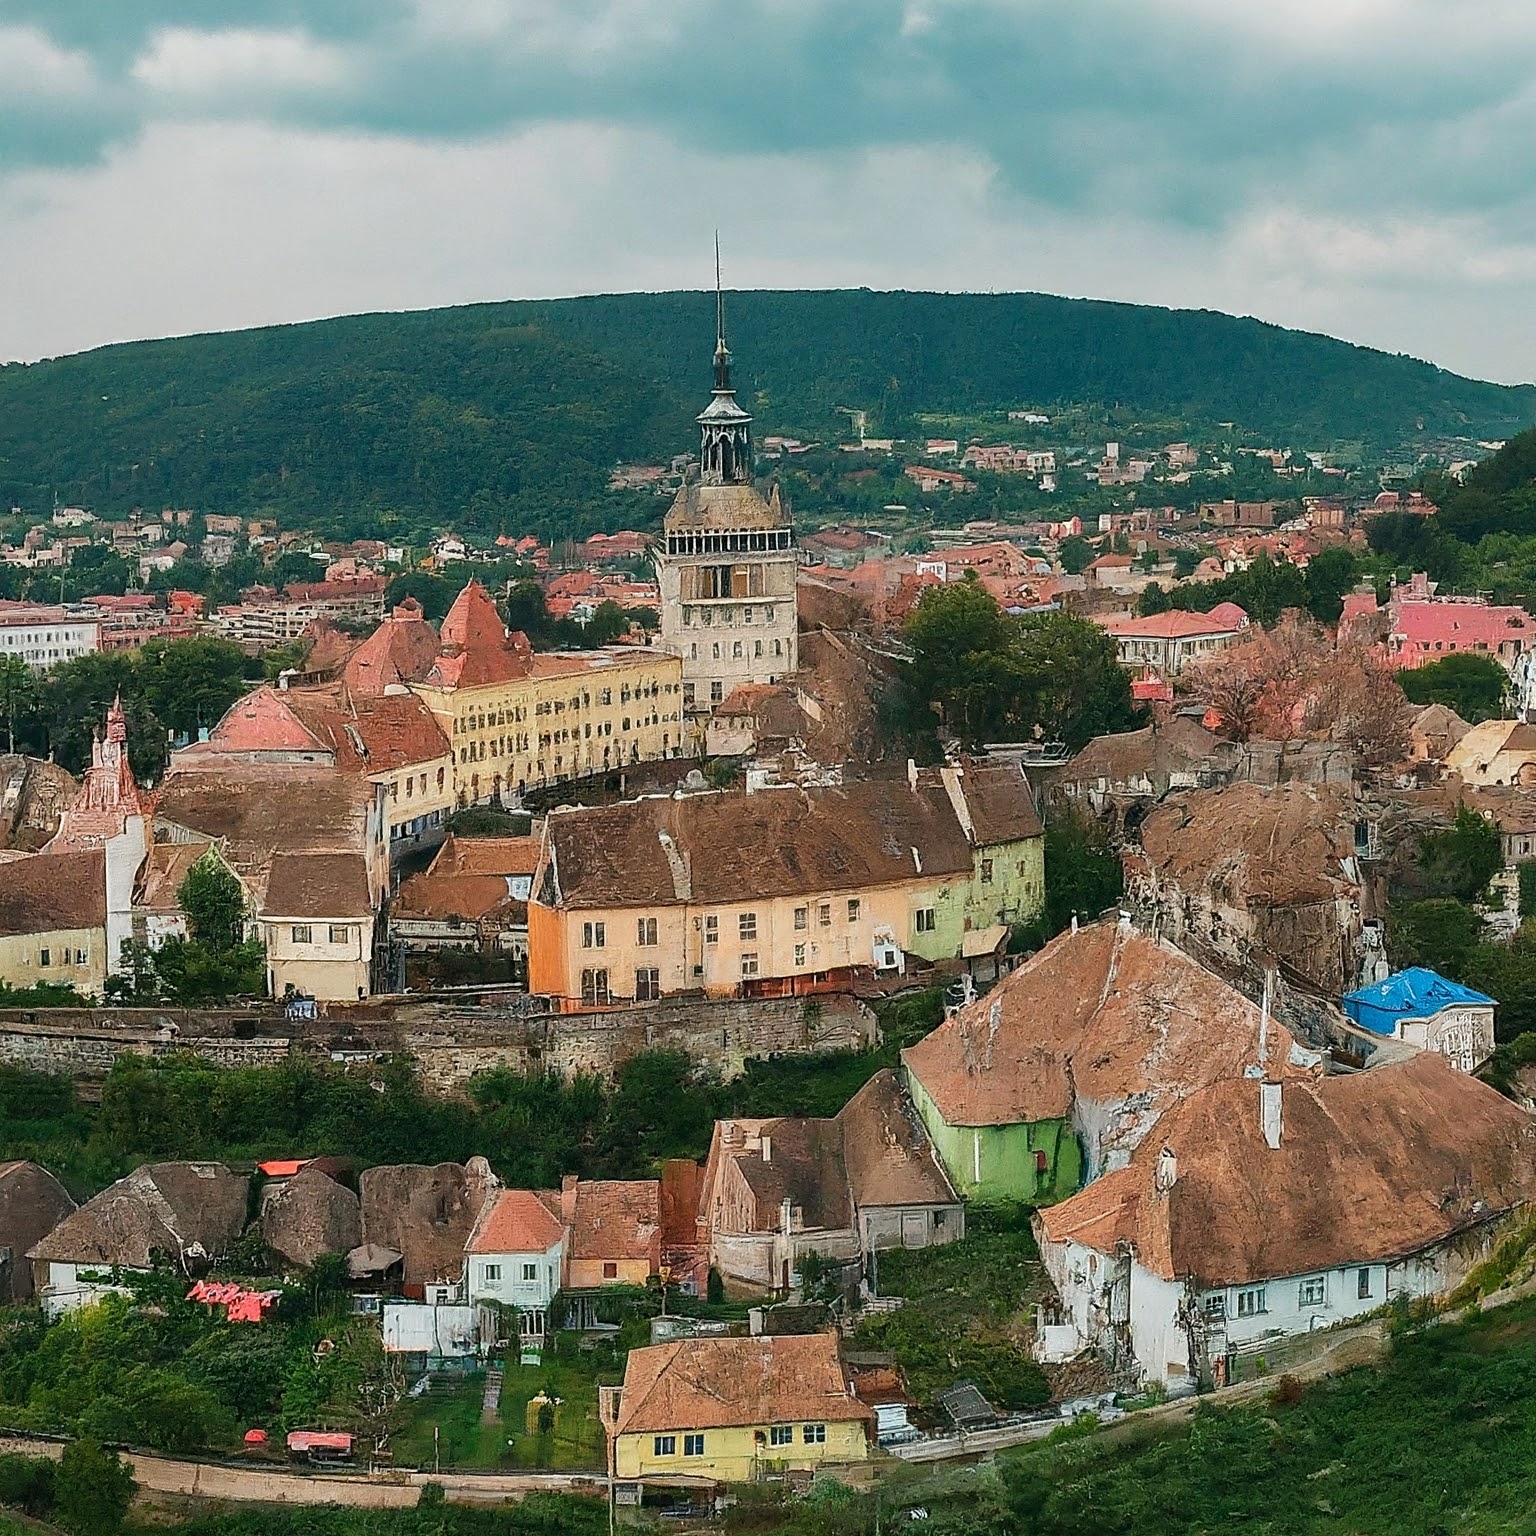 Panoramic view of Sighisoara's Citadel, a UNESCO World Heritage Site.